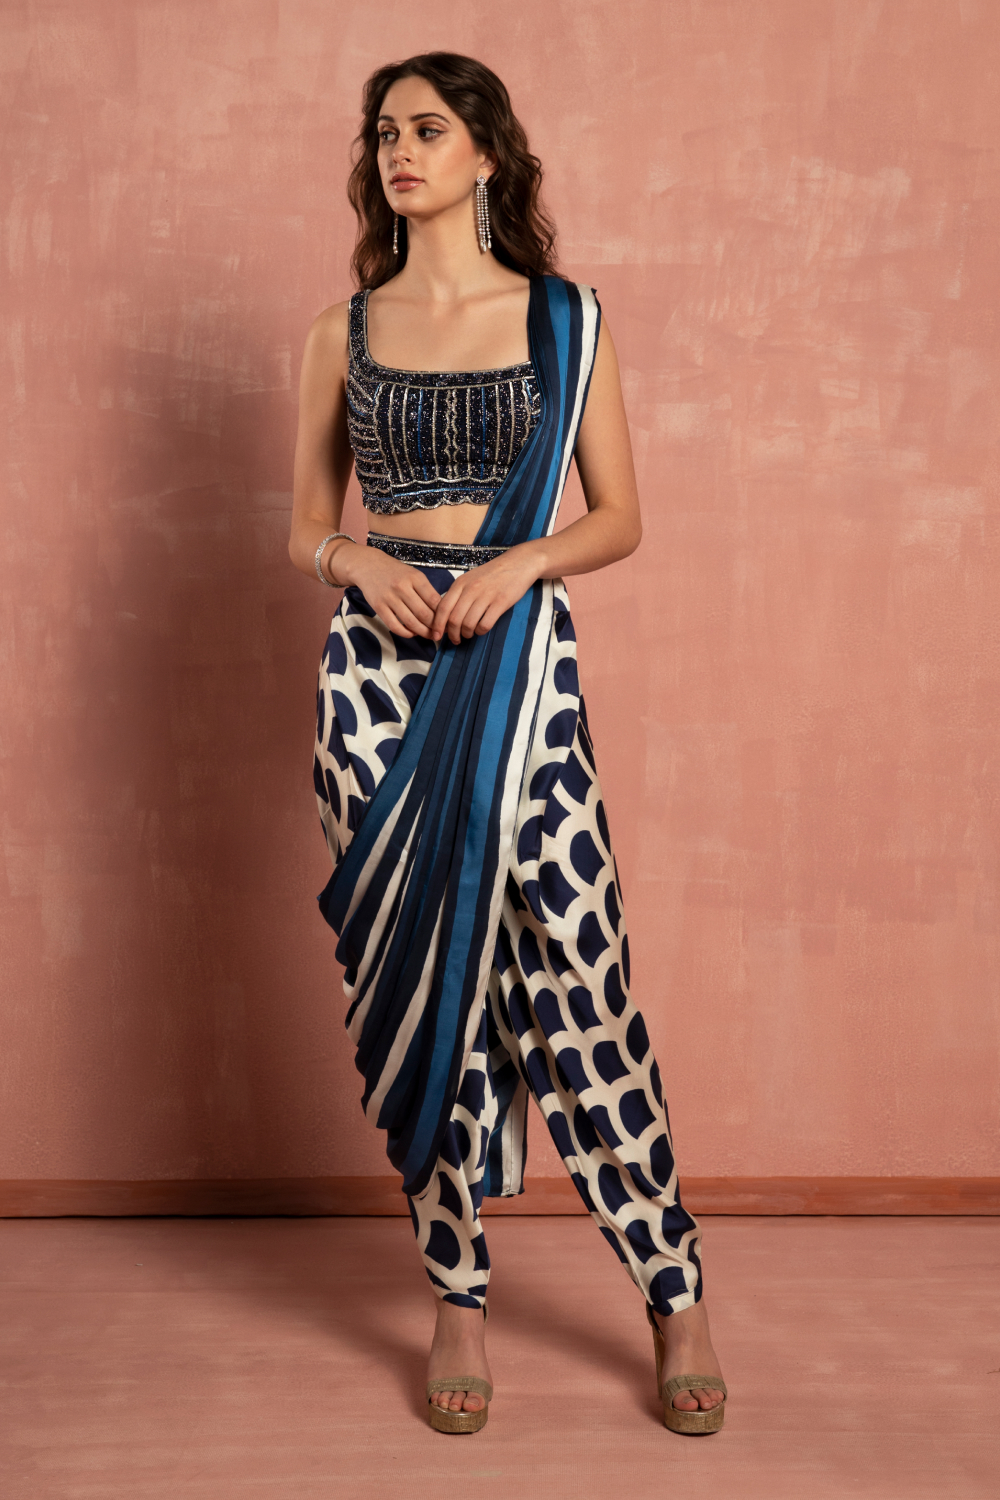 7 Pre Stitched Saree Designs To Try For Your Next Party